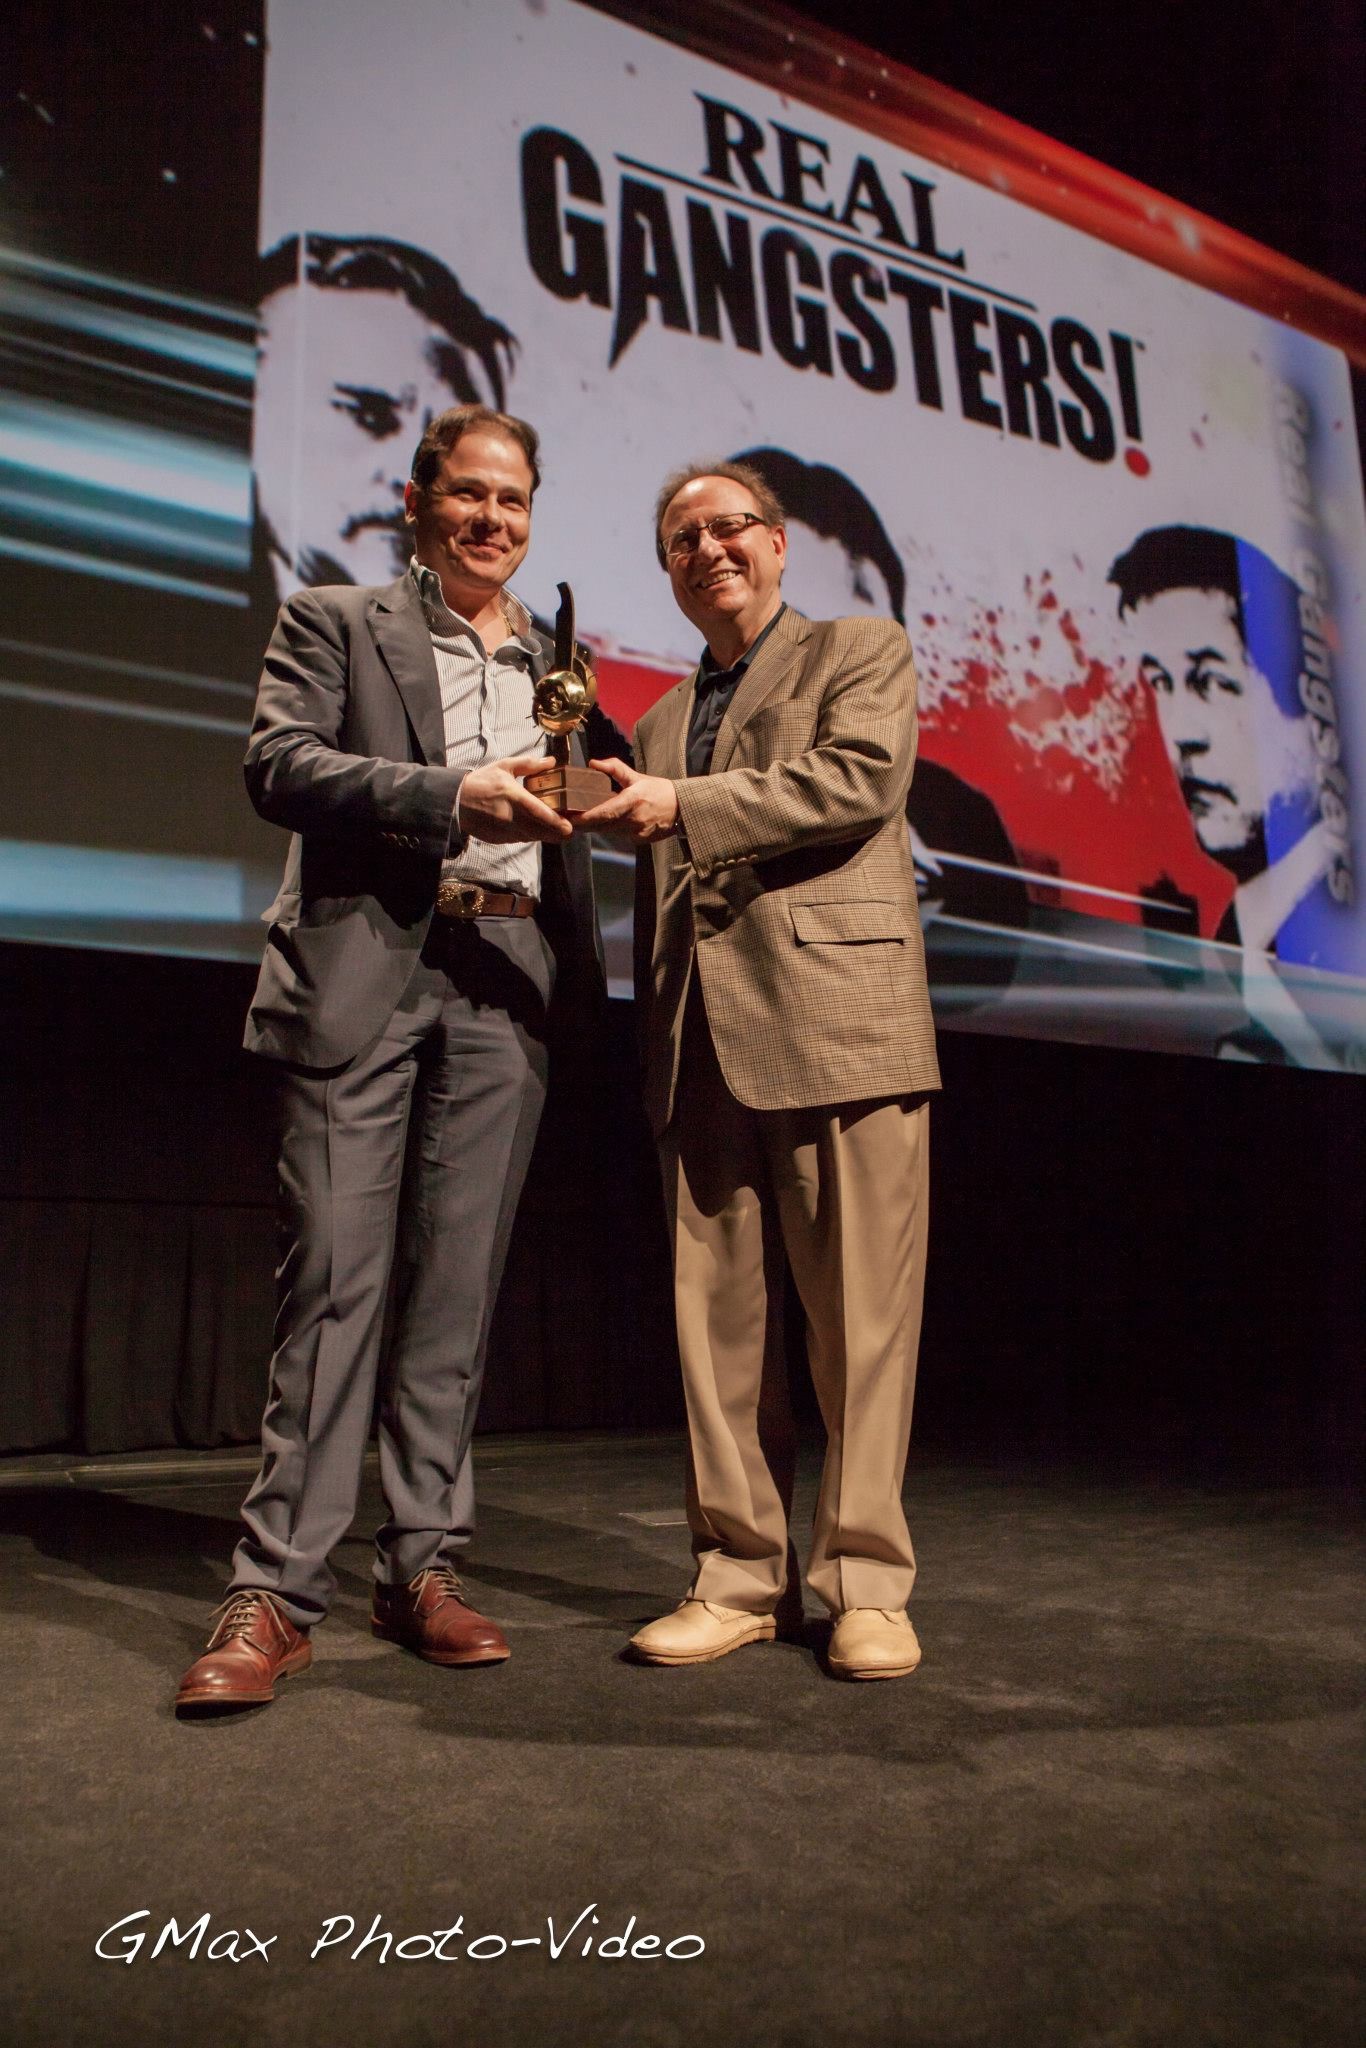 Frank receiving ICFF Award for Real Gangsters.